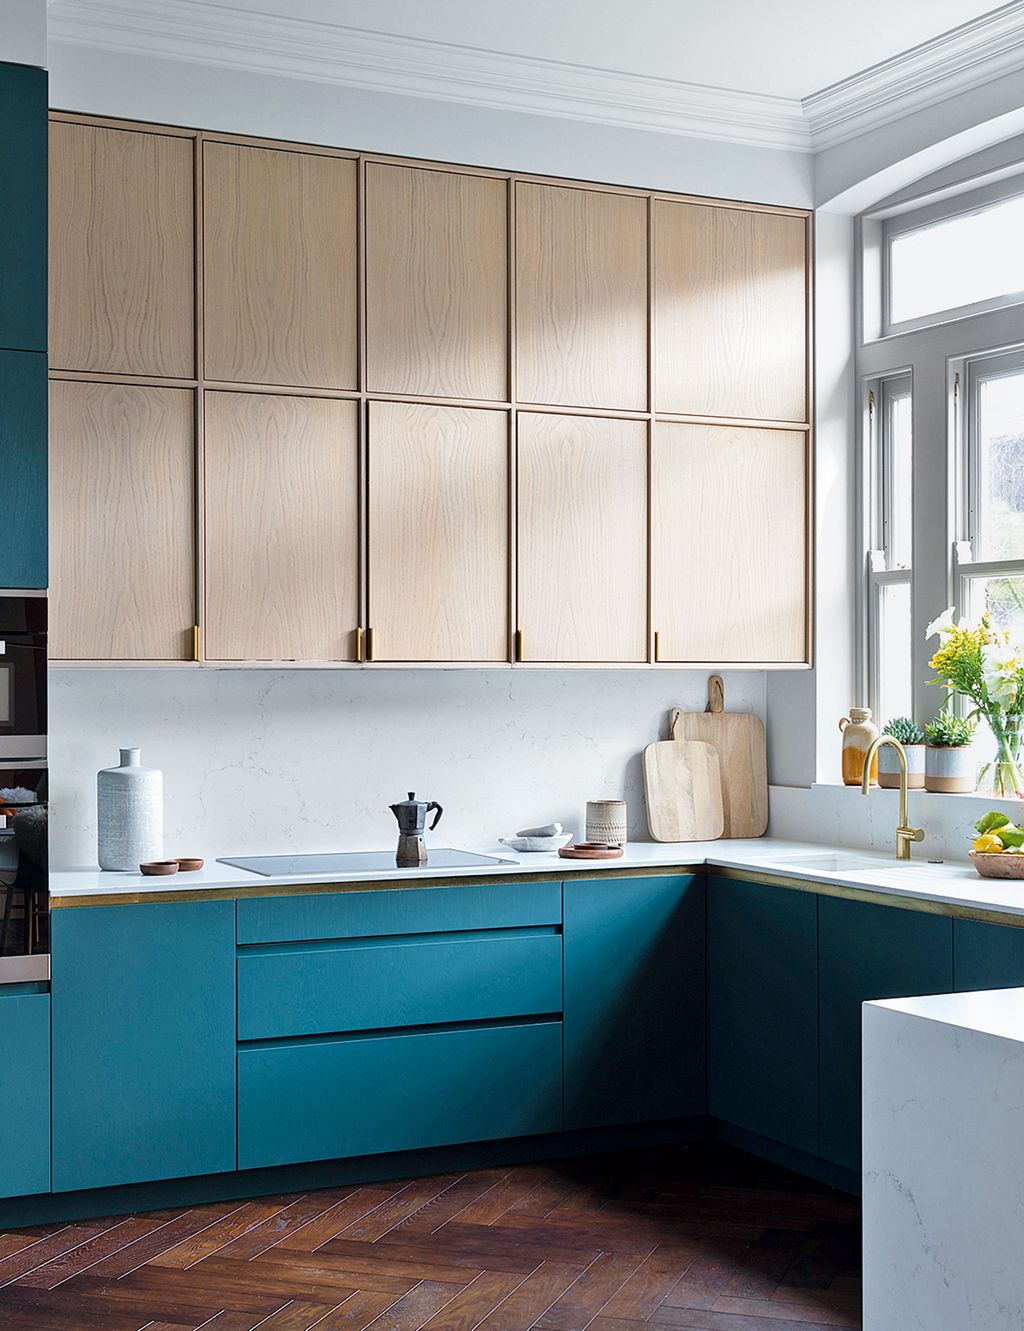 Can kitchen cabinets be two different colors?